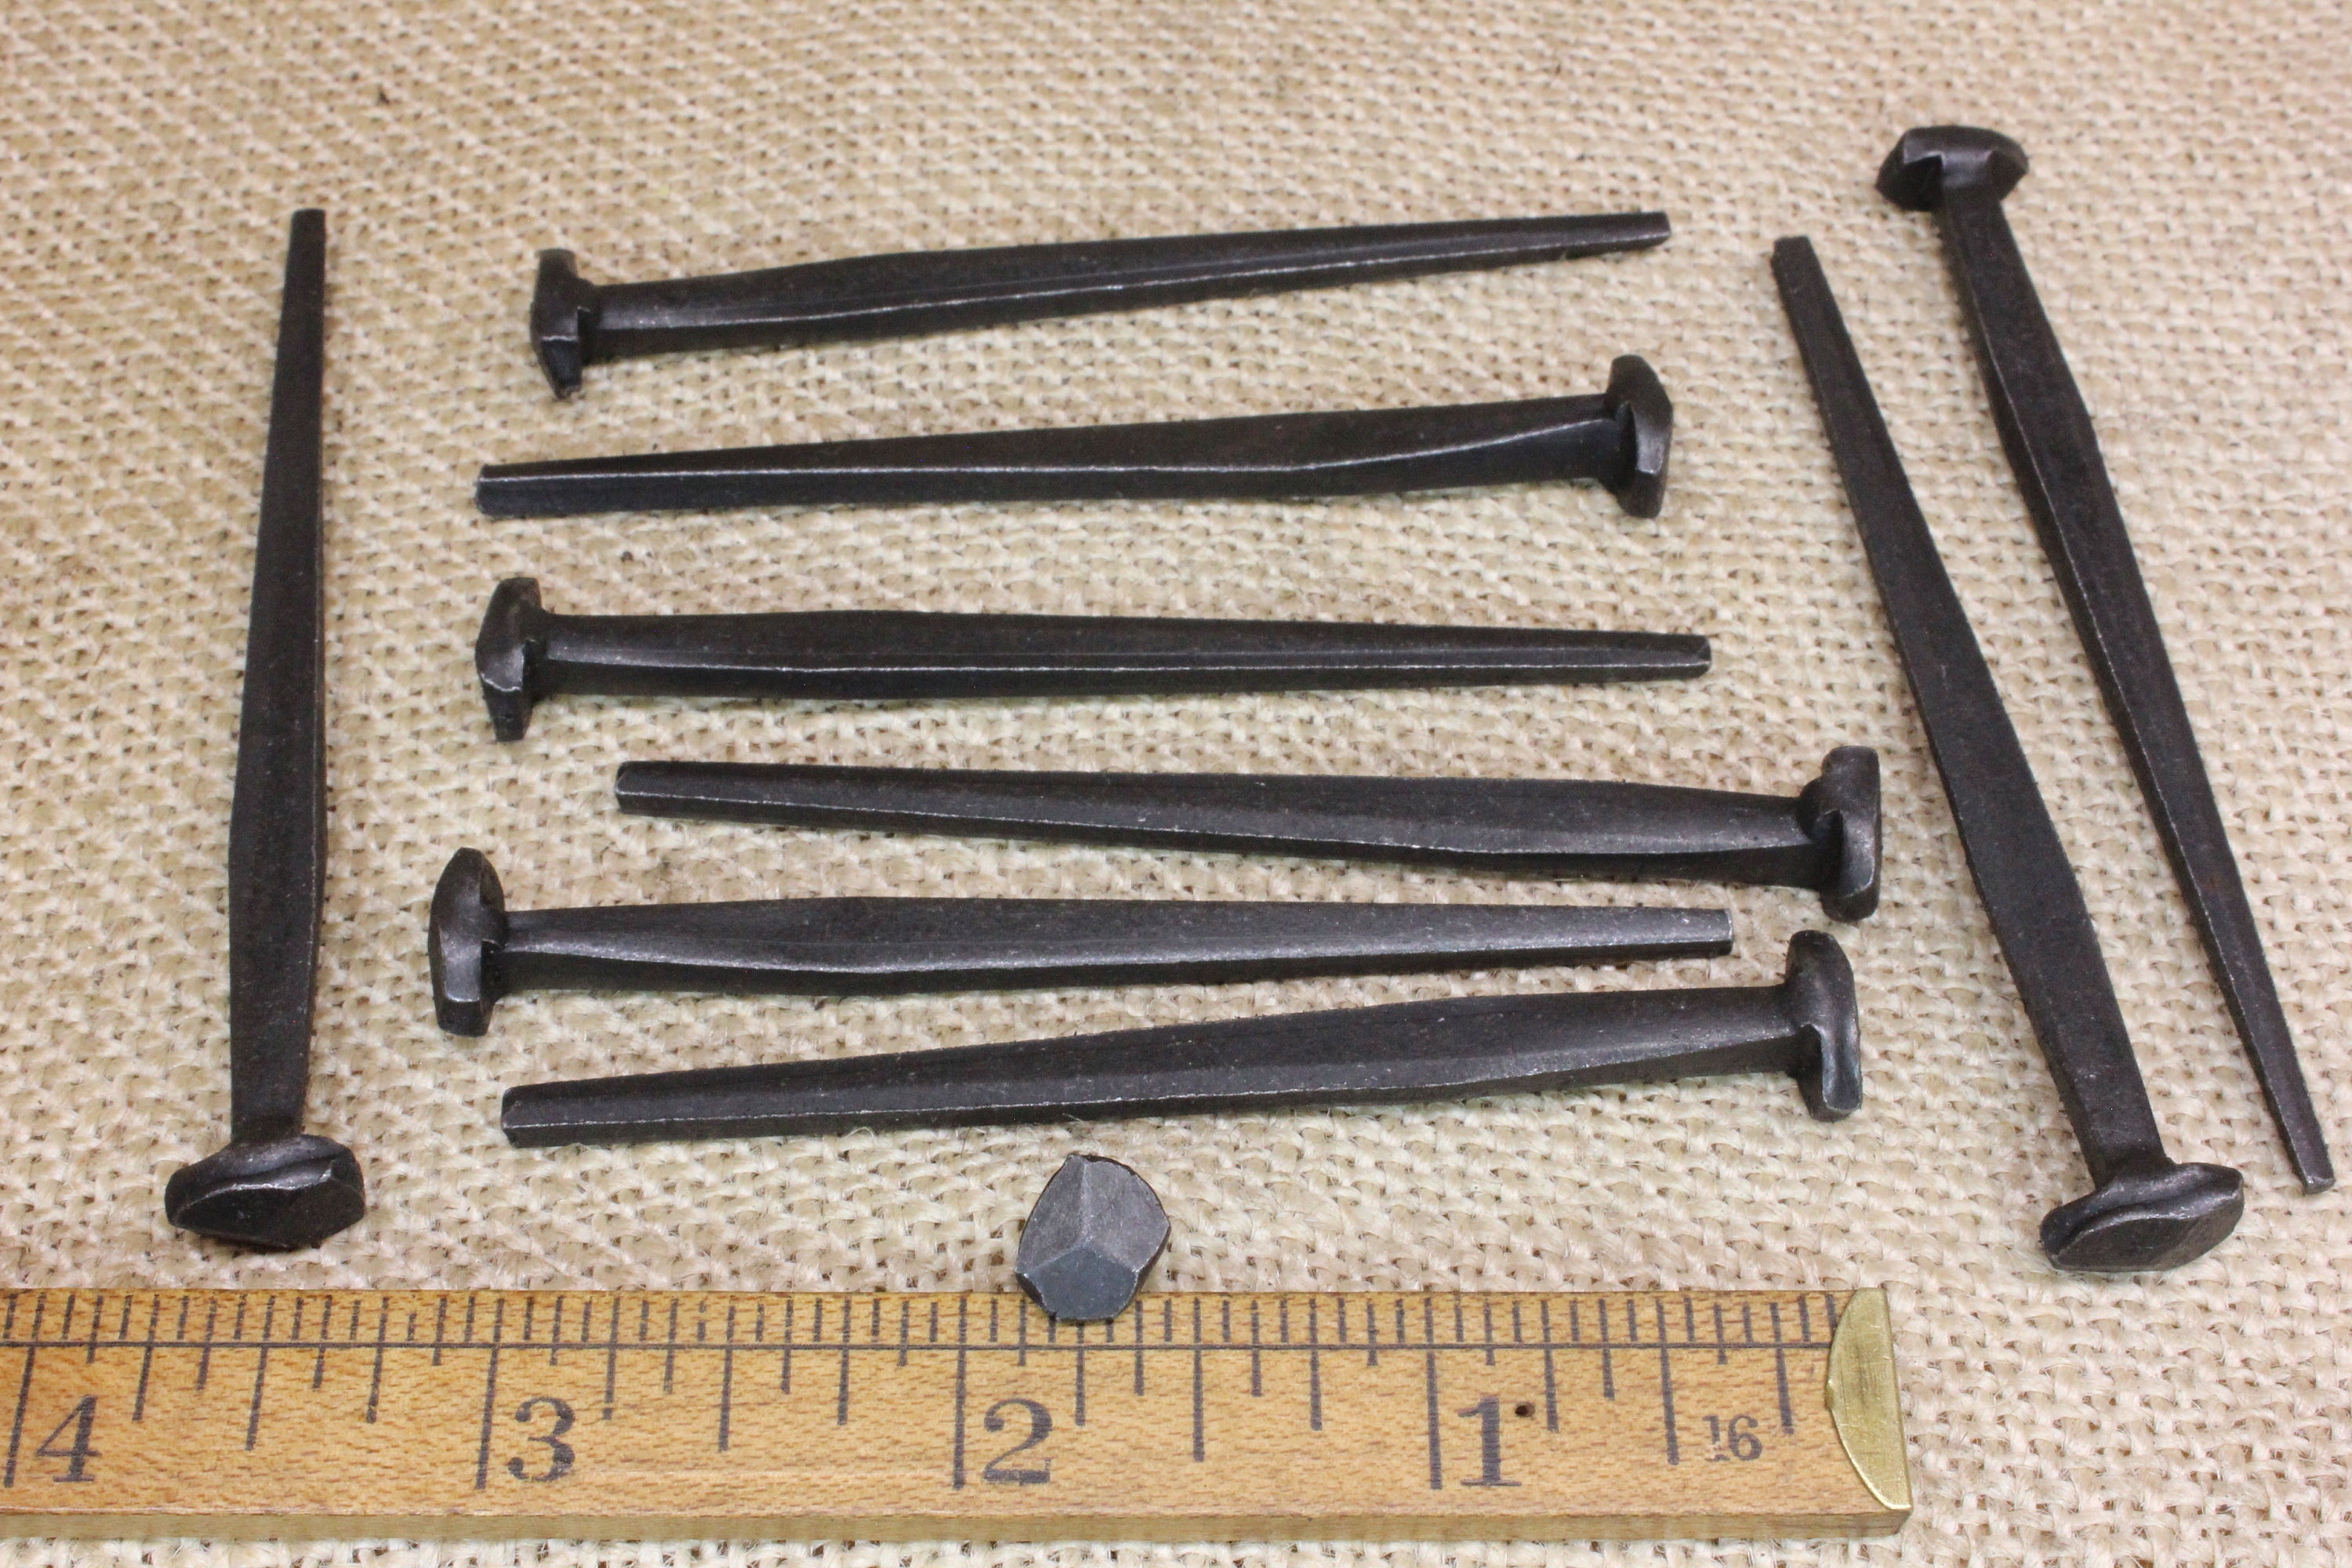 Buy 3 Rosehead Nails, 10 Pieces, 3 Inch Decorative Square Hand Forged Look  Wrought Iron Spike Antique Rustic Look 10140.8 Online in India - Etsy